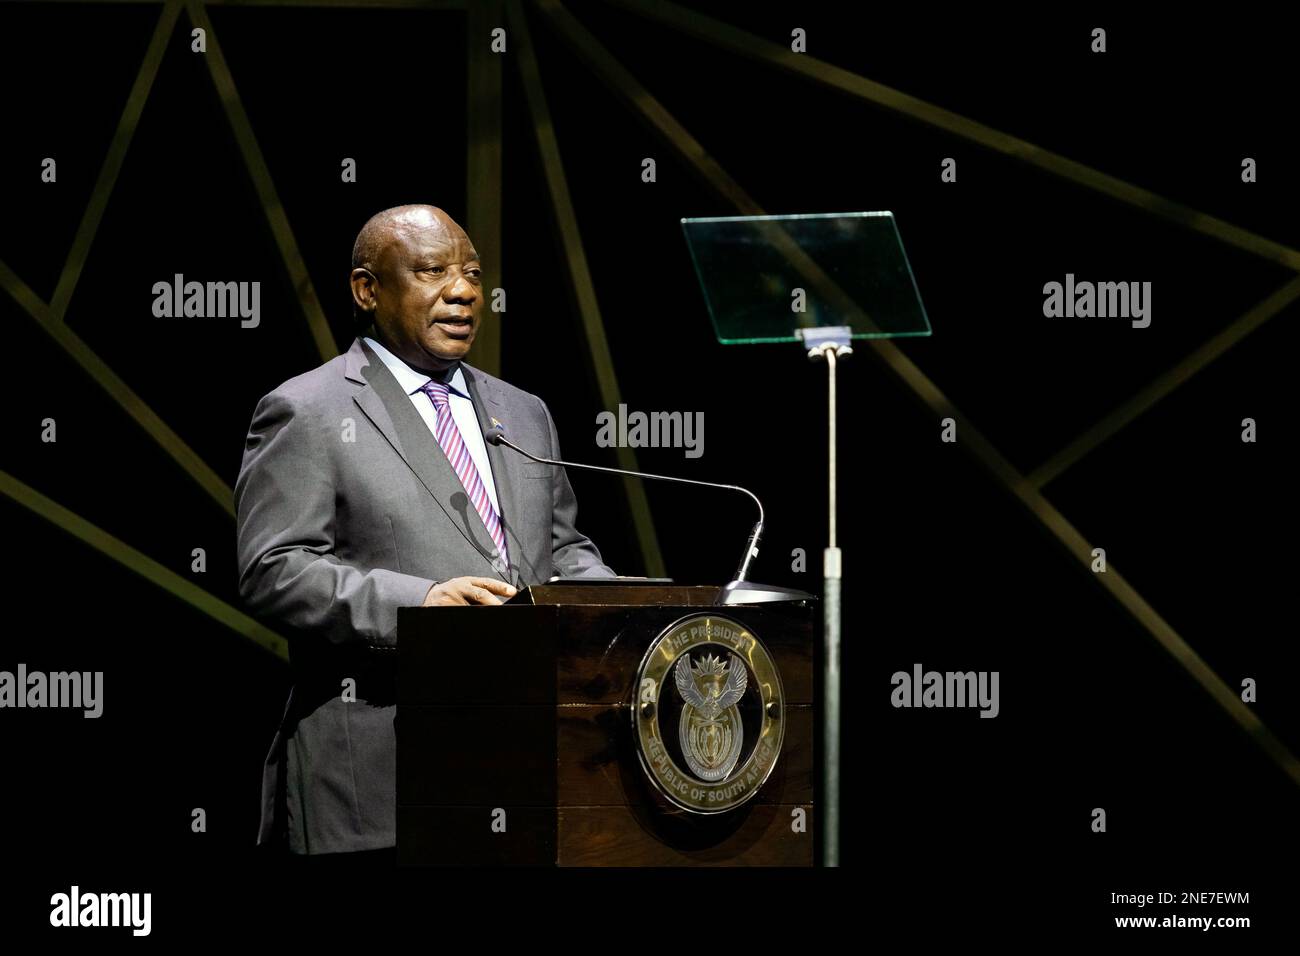 Cape Town, South Africa - February 7, 2023: Cyril Ramaphosa President of South Africa speaking at conference event Stock Photo